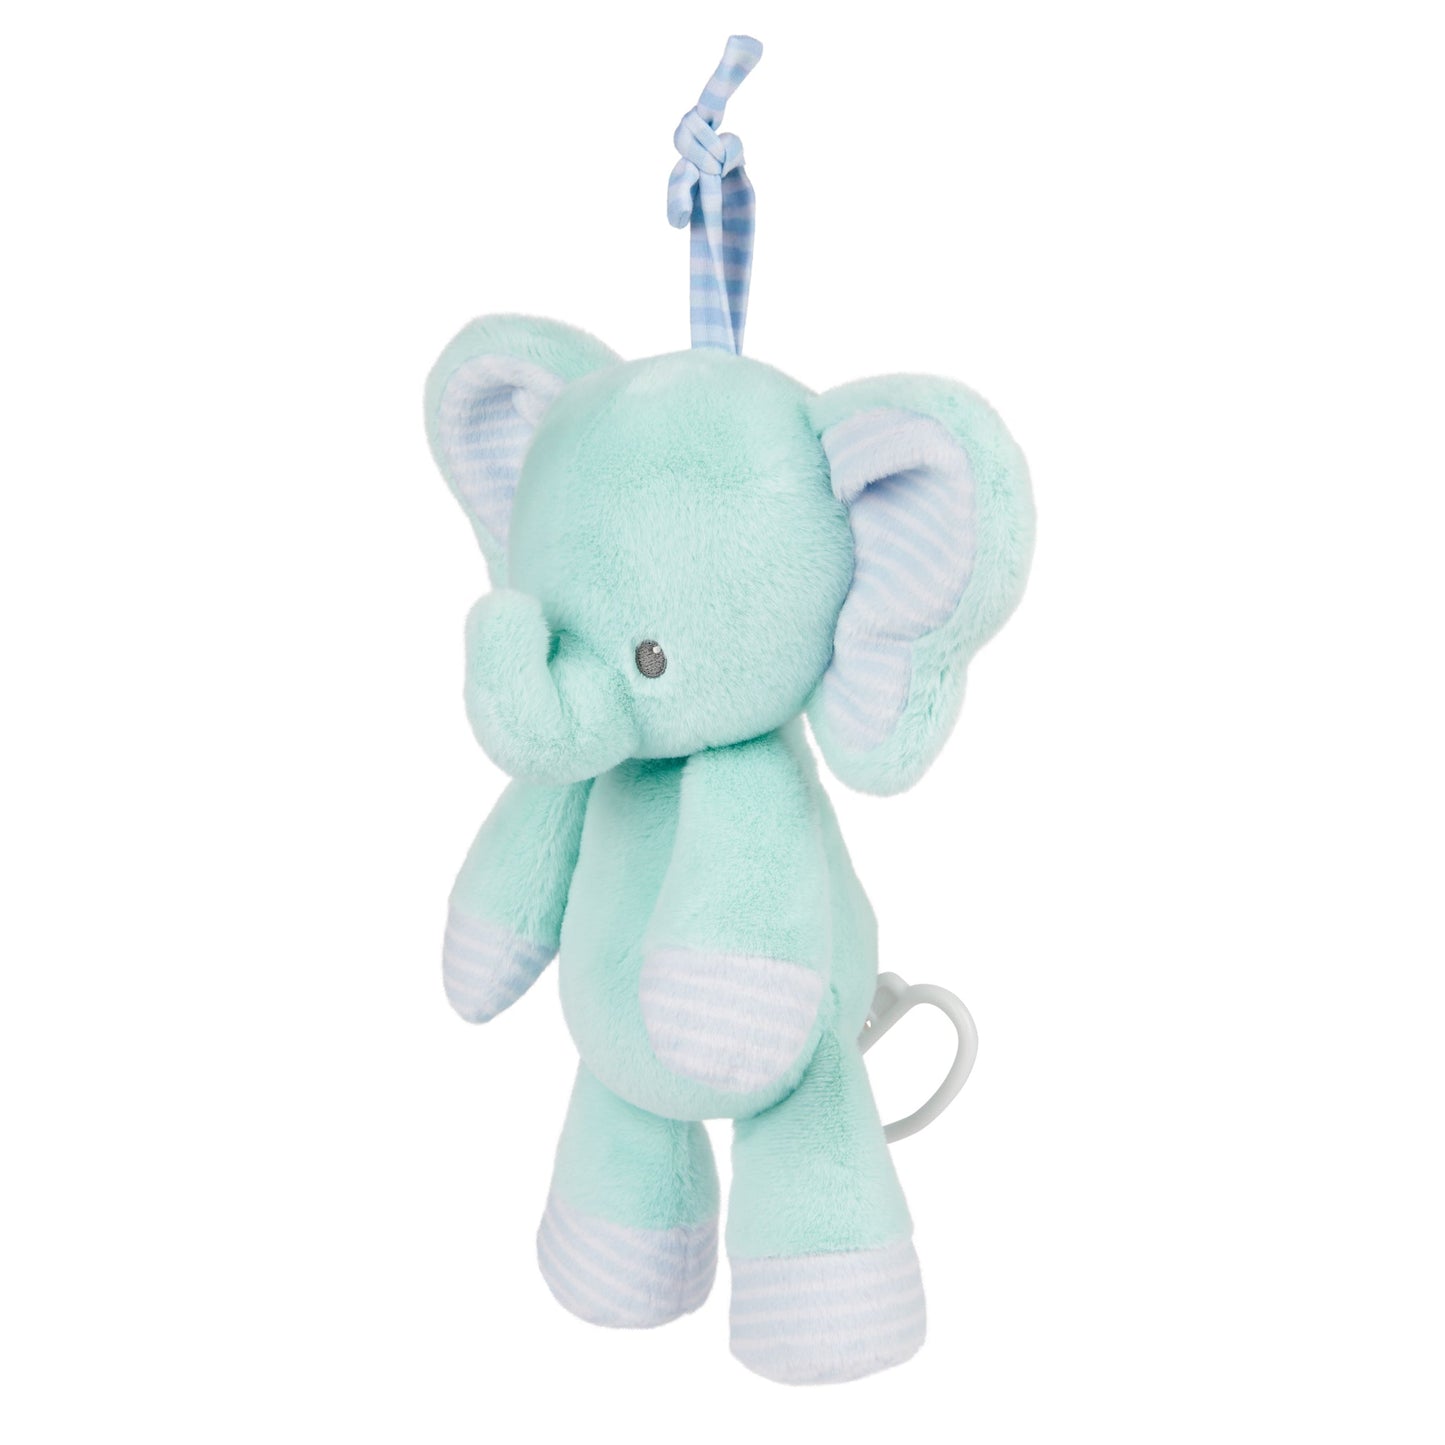 SAFARI FRIENDS ELEPHANT PULL-DOWN MUSICAL PLUSH (PLAYS BRAHMS’ LULLABY), 12 IN